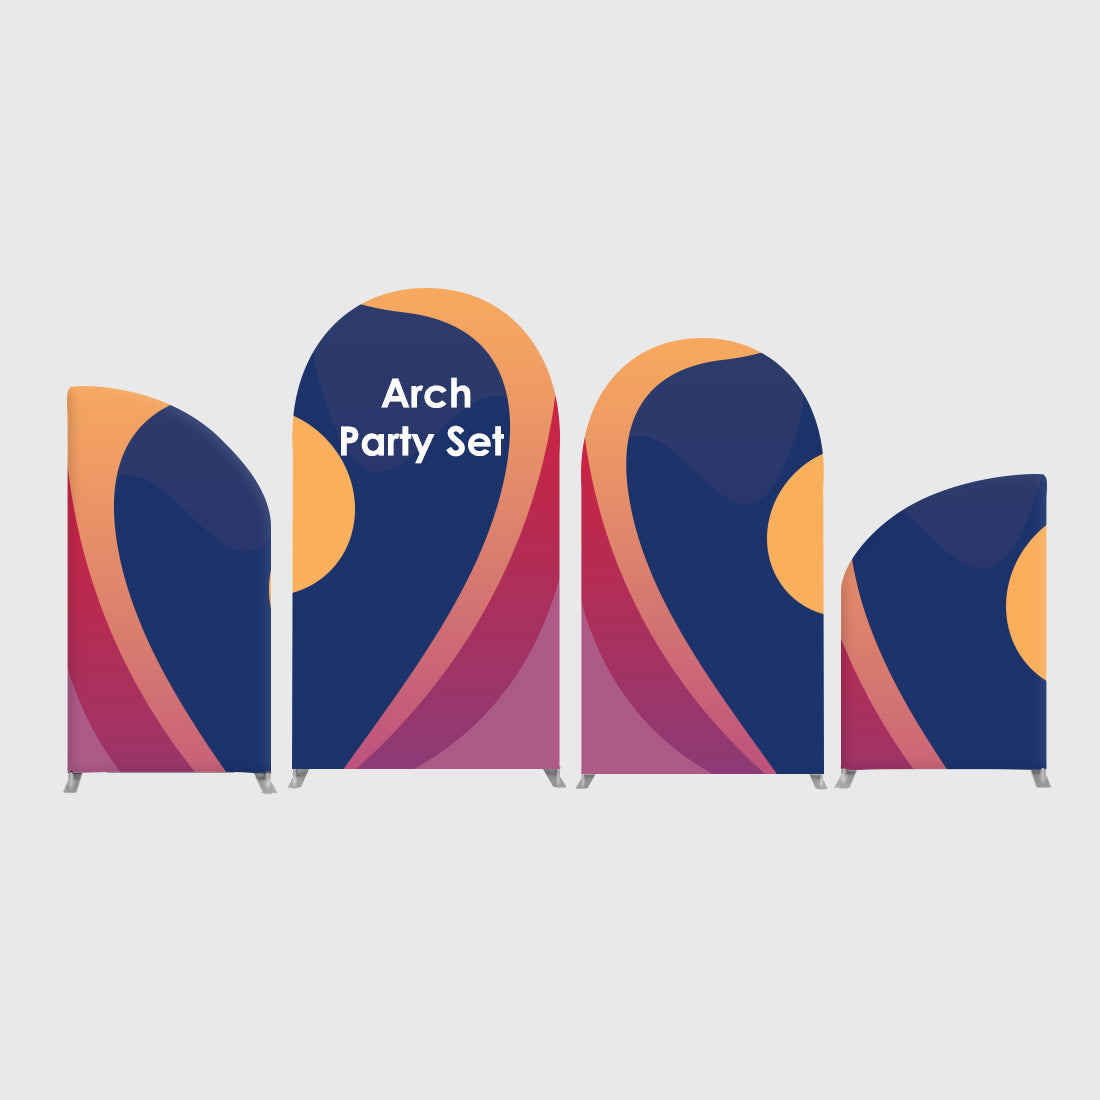 Arch Party Sets - 4 Walls